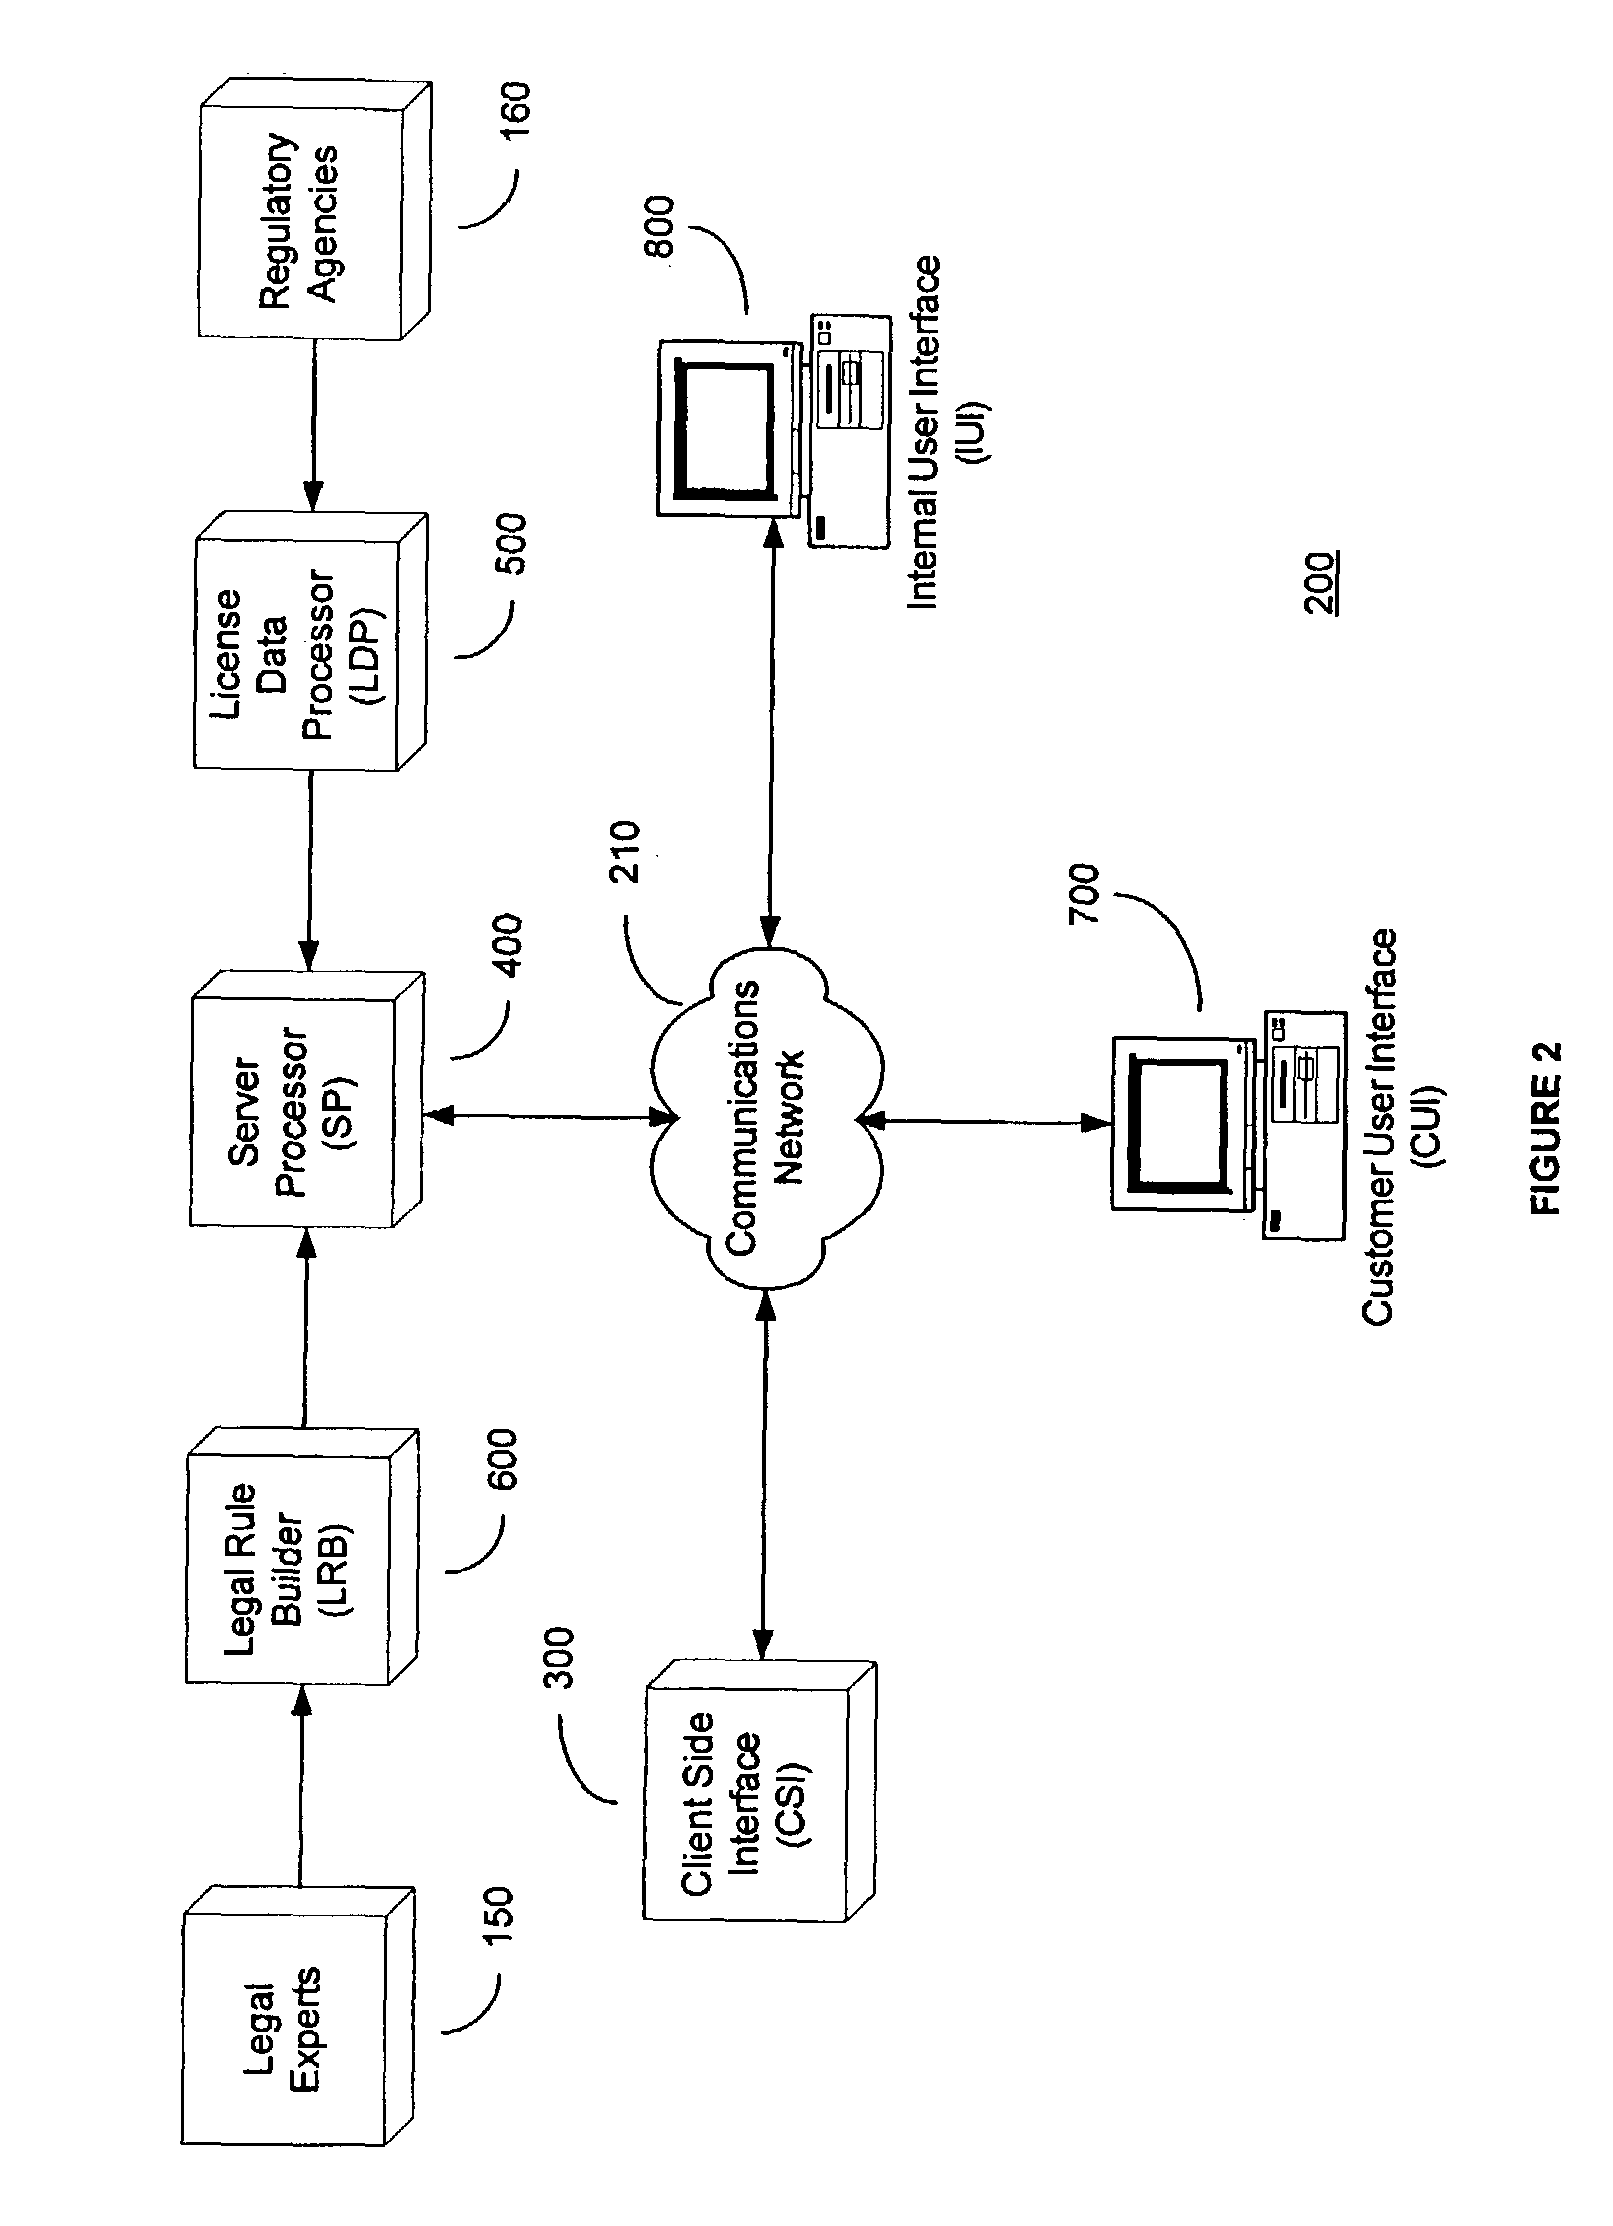 System and method for automated loan compliance assessment